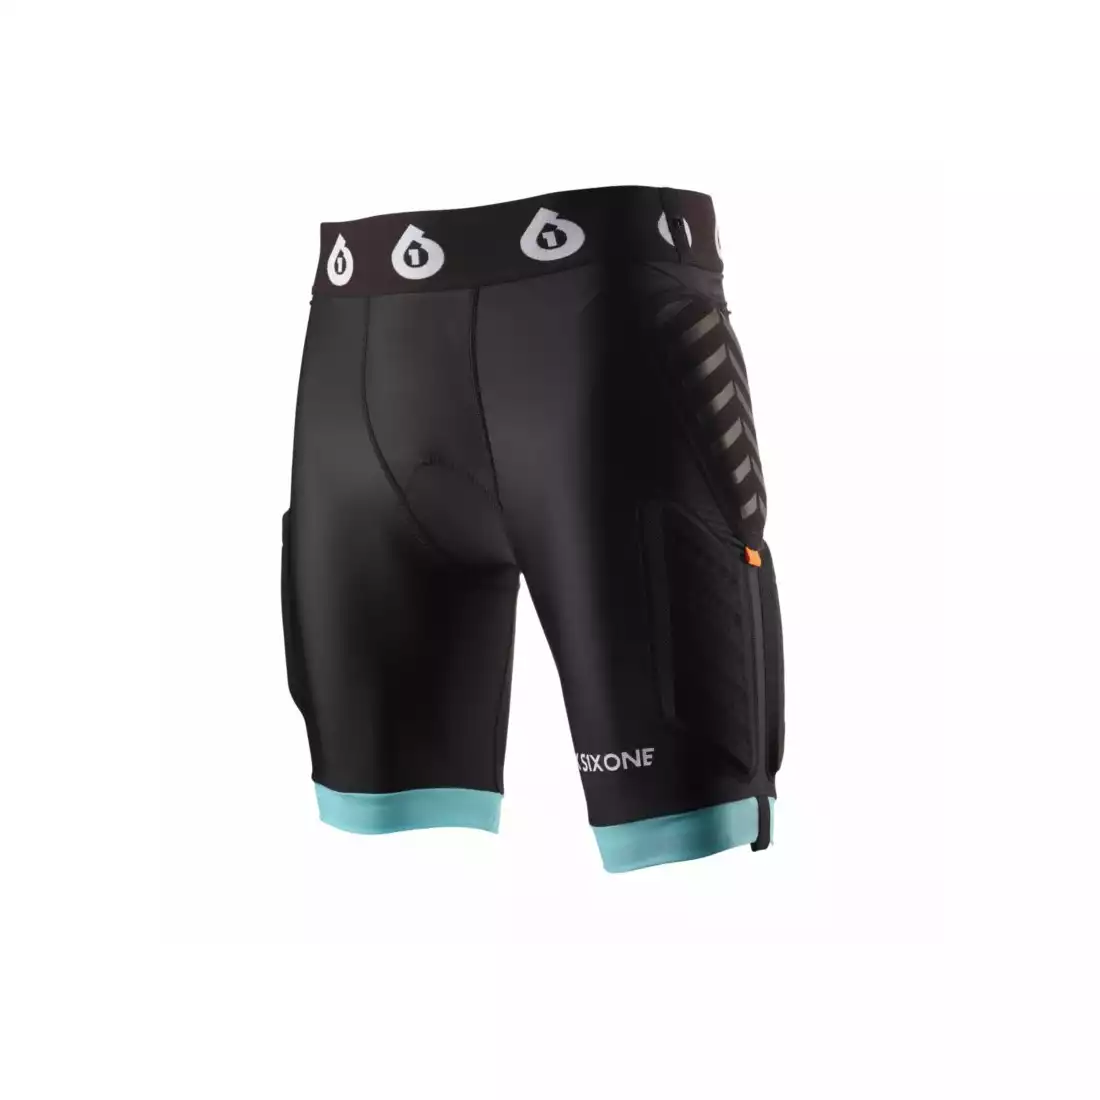 661 EVO COMPRESSION WOMENS Women's cycling shorts with hip protection, black and turquoise